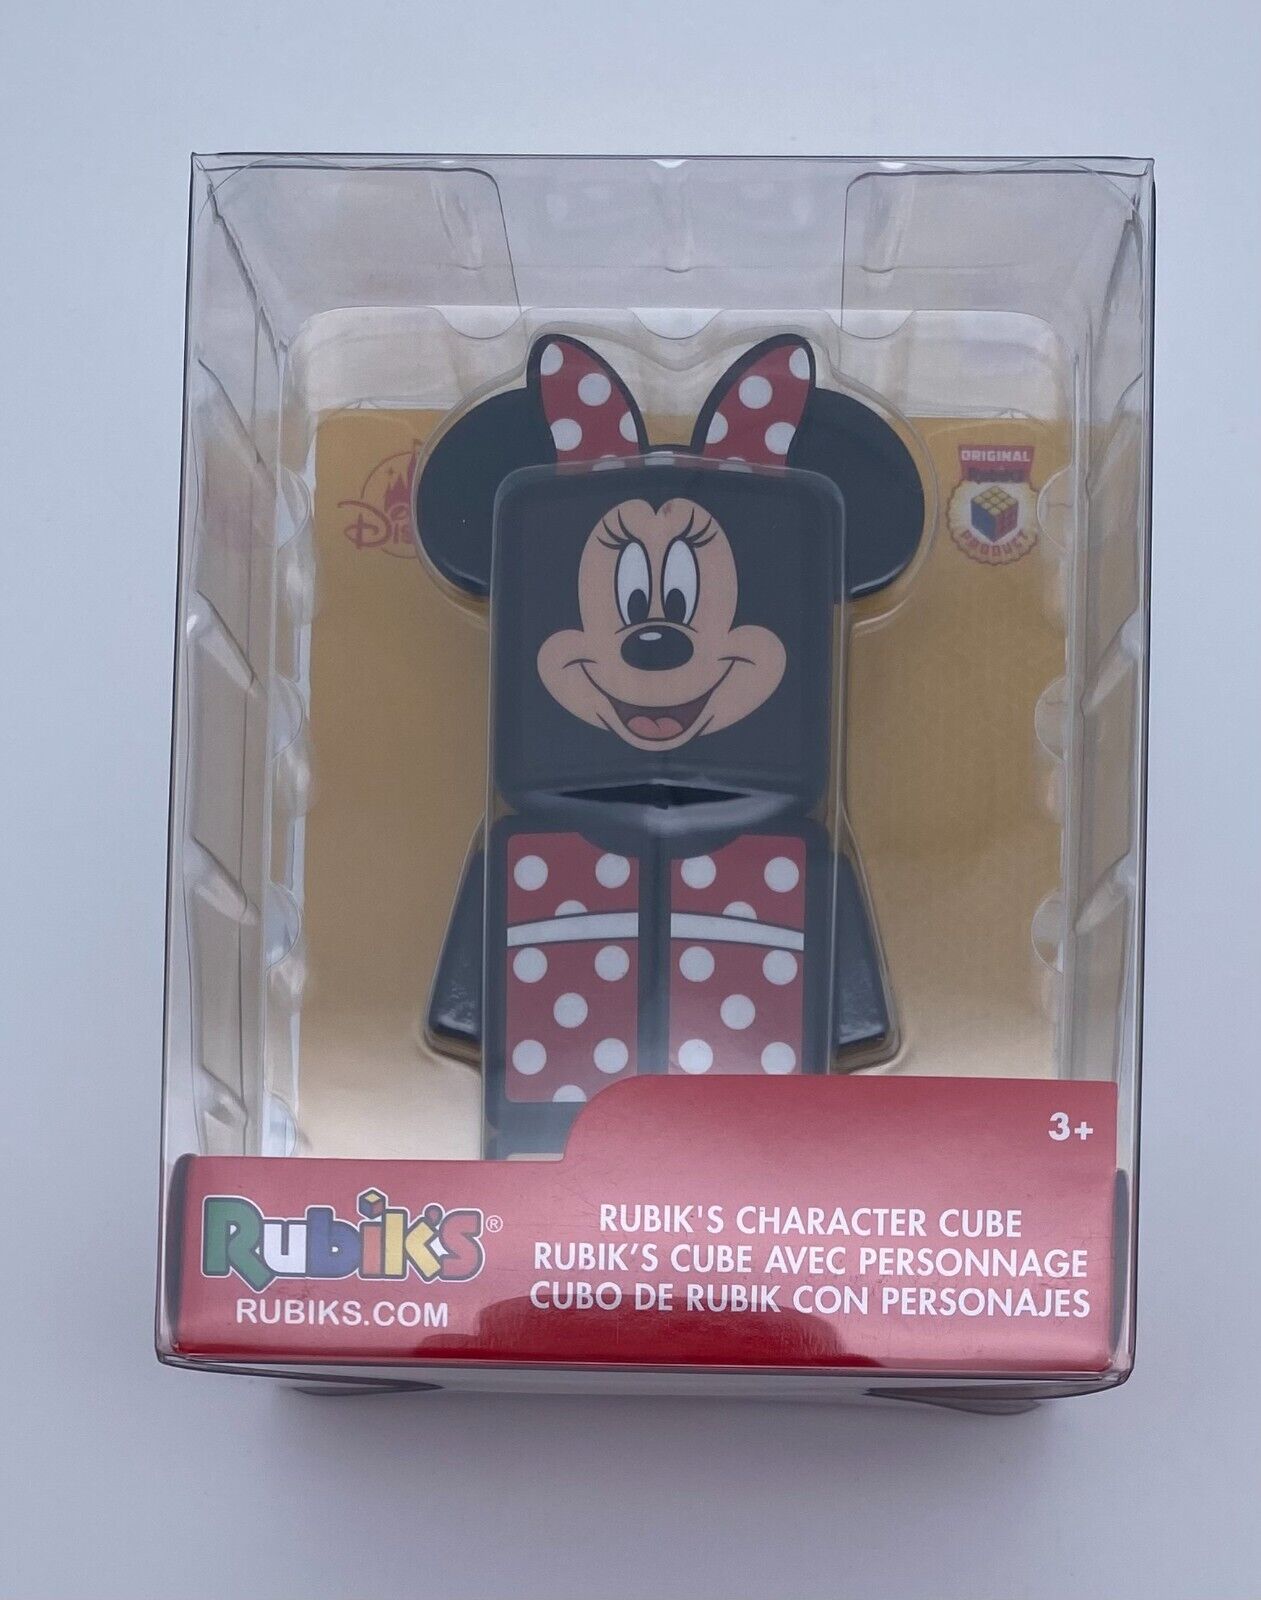 DISNEY RUBIK'S CHARACTER CUBE PUZZLE MINNIE MOUSE